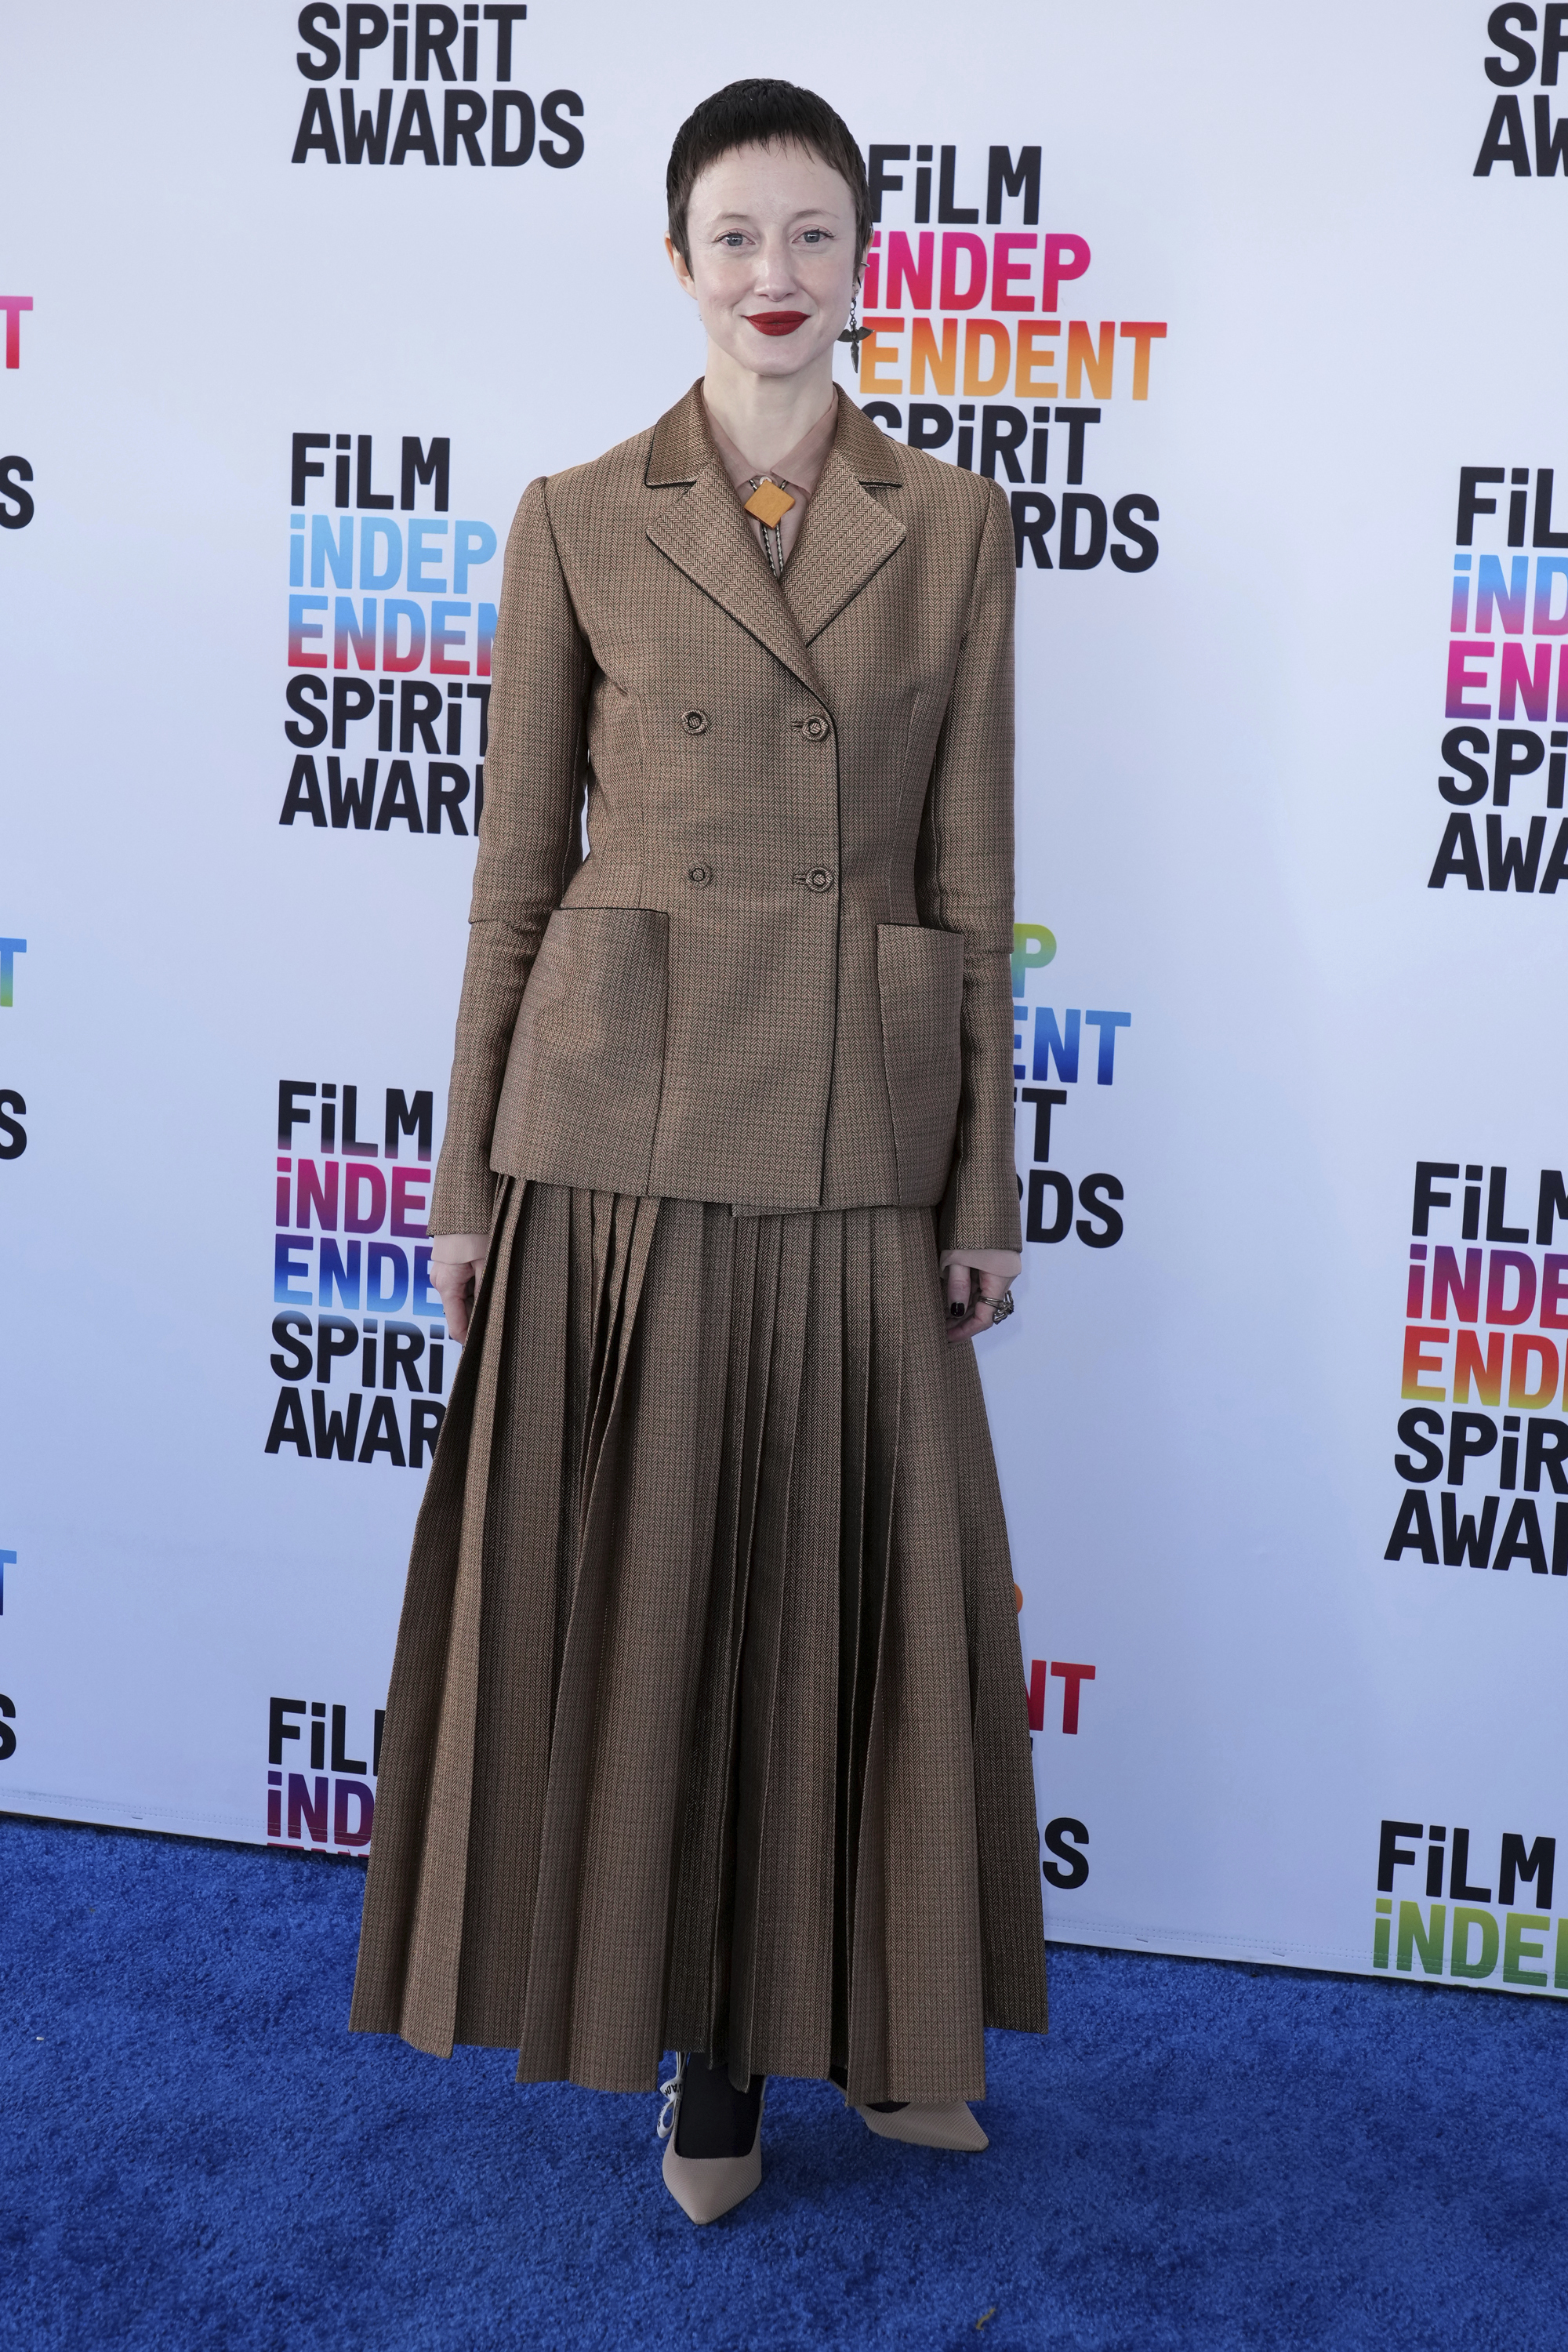 Andrea Riseborough wearing a brown tweed-like blazer with a matching ankle-length pleated skirt 